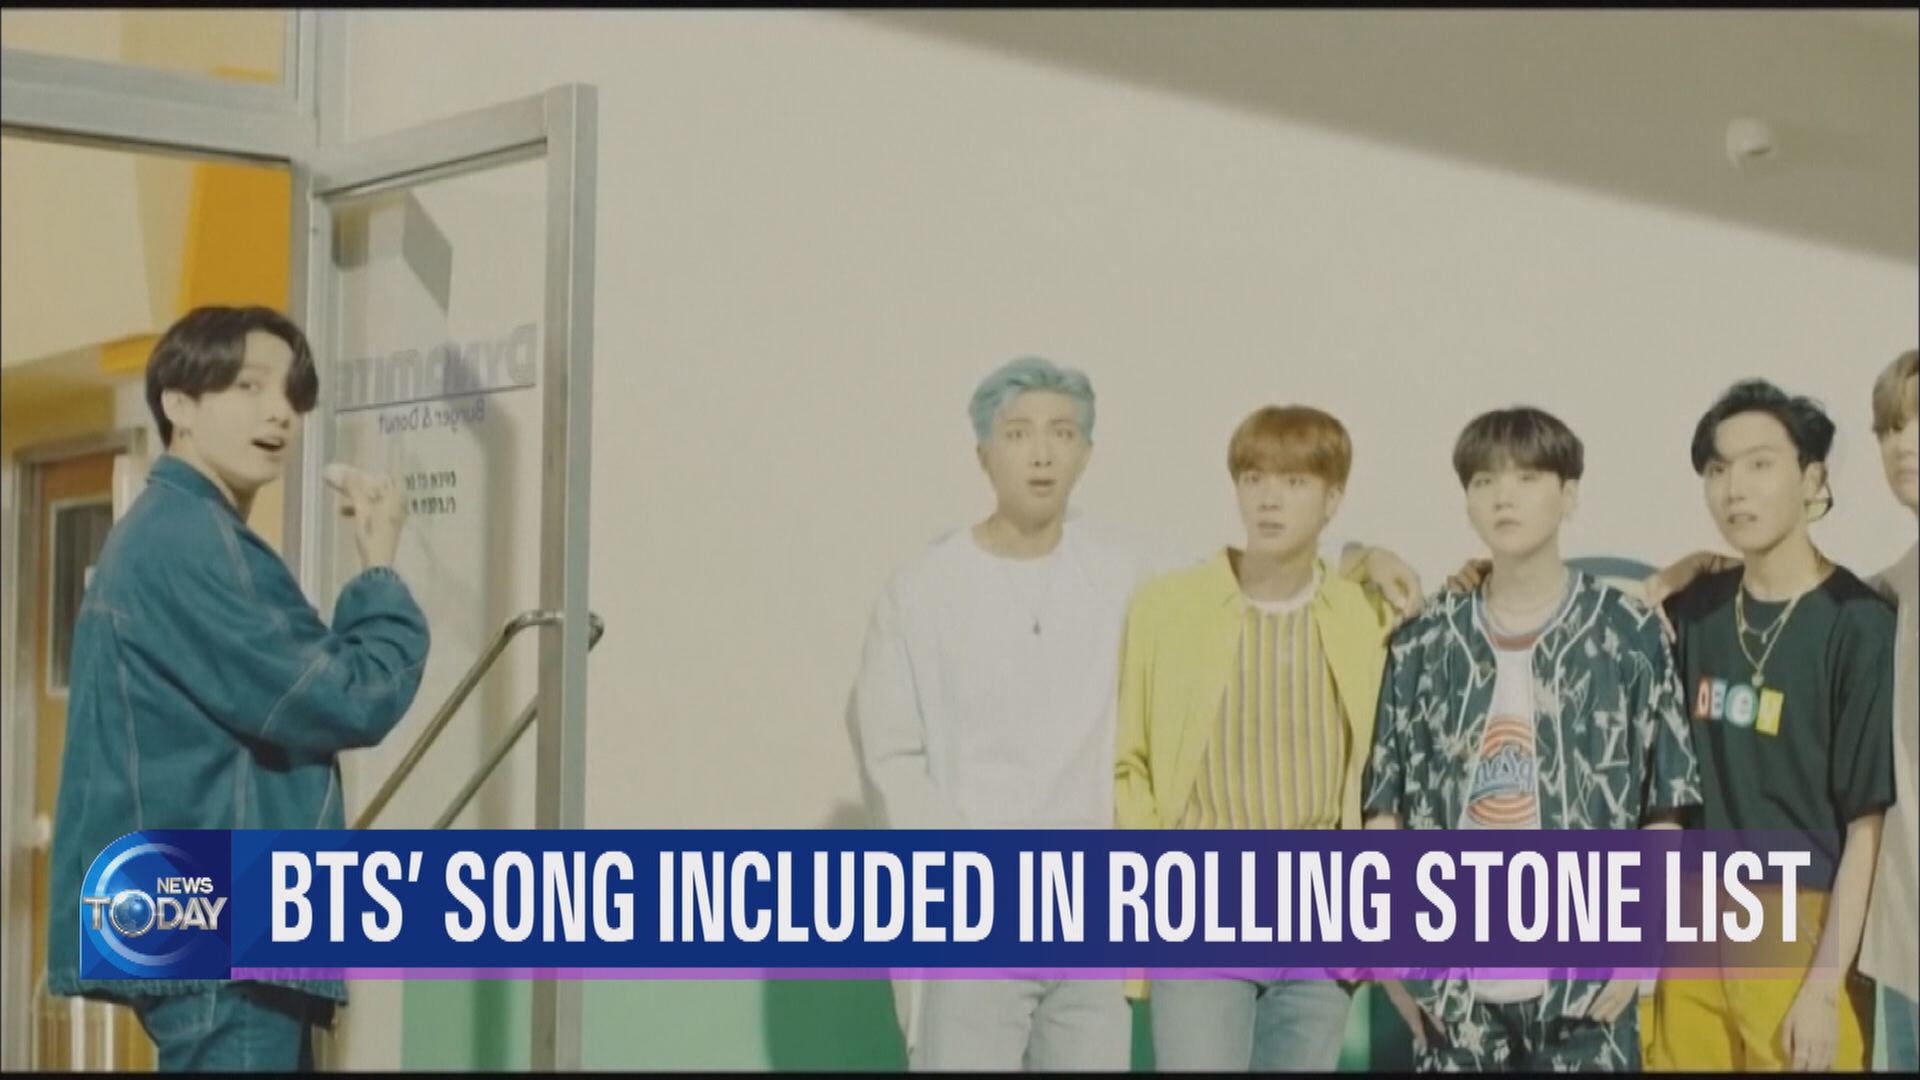 BTS’ SONG INCLUDED IN ROLLING STONE LIST